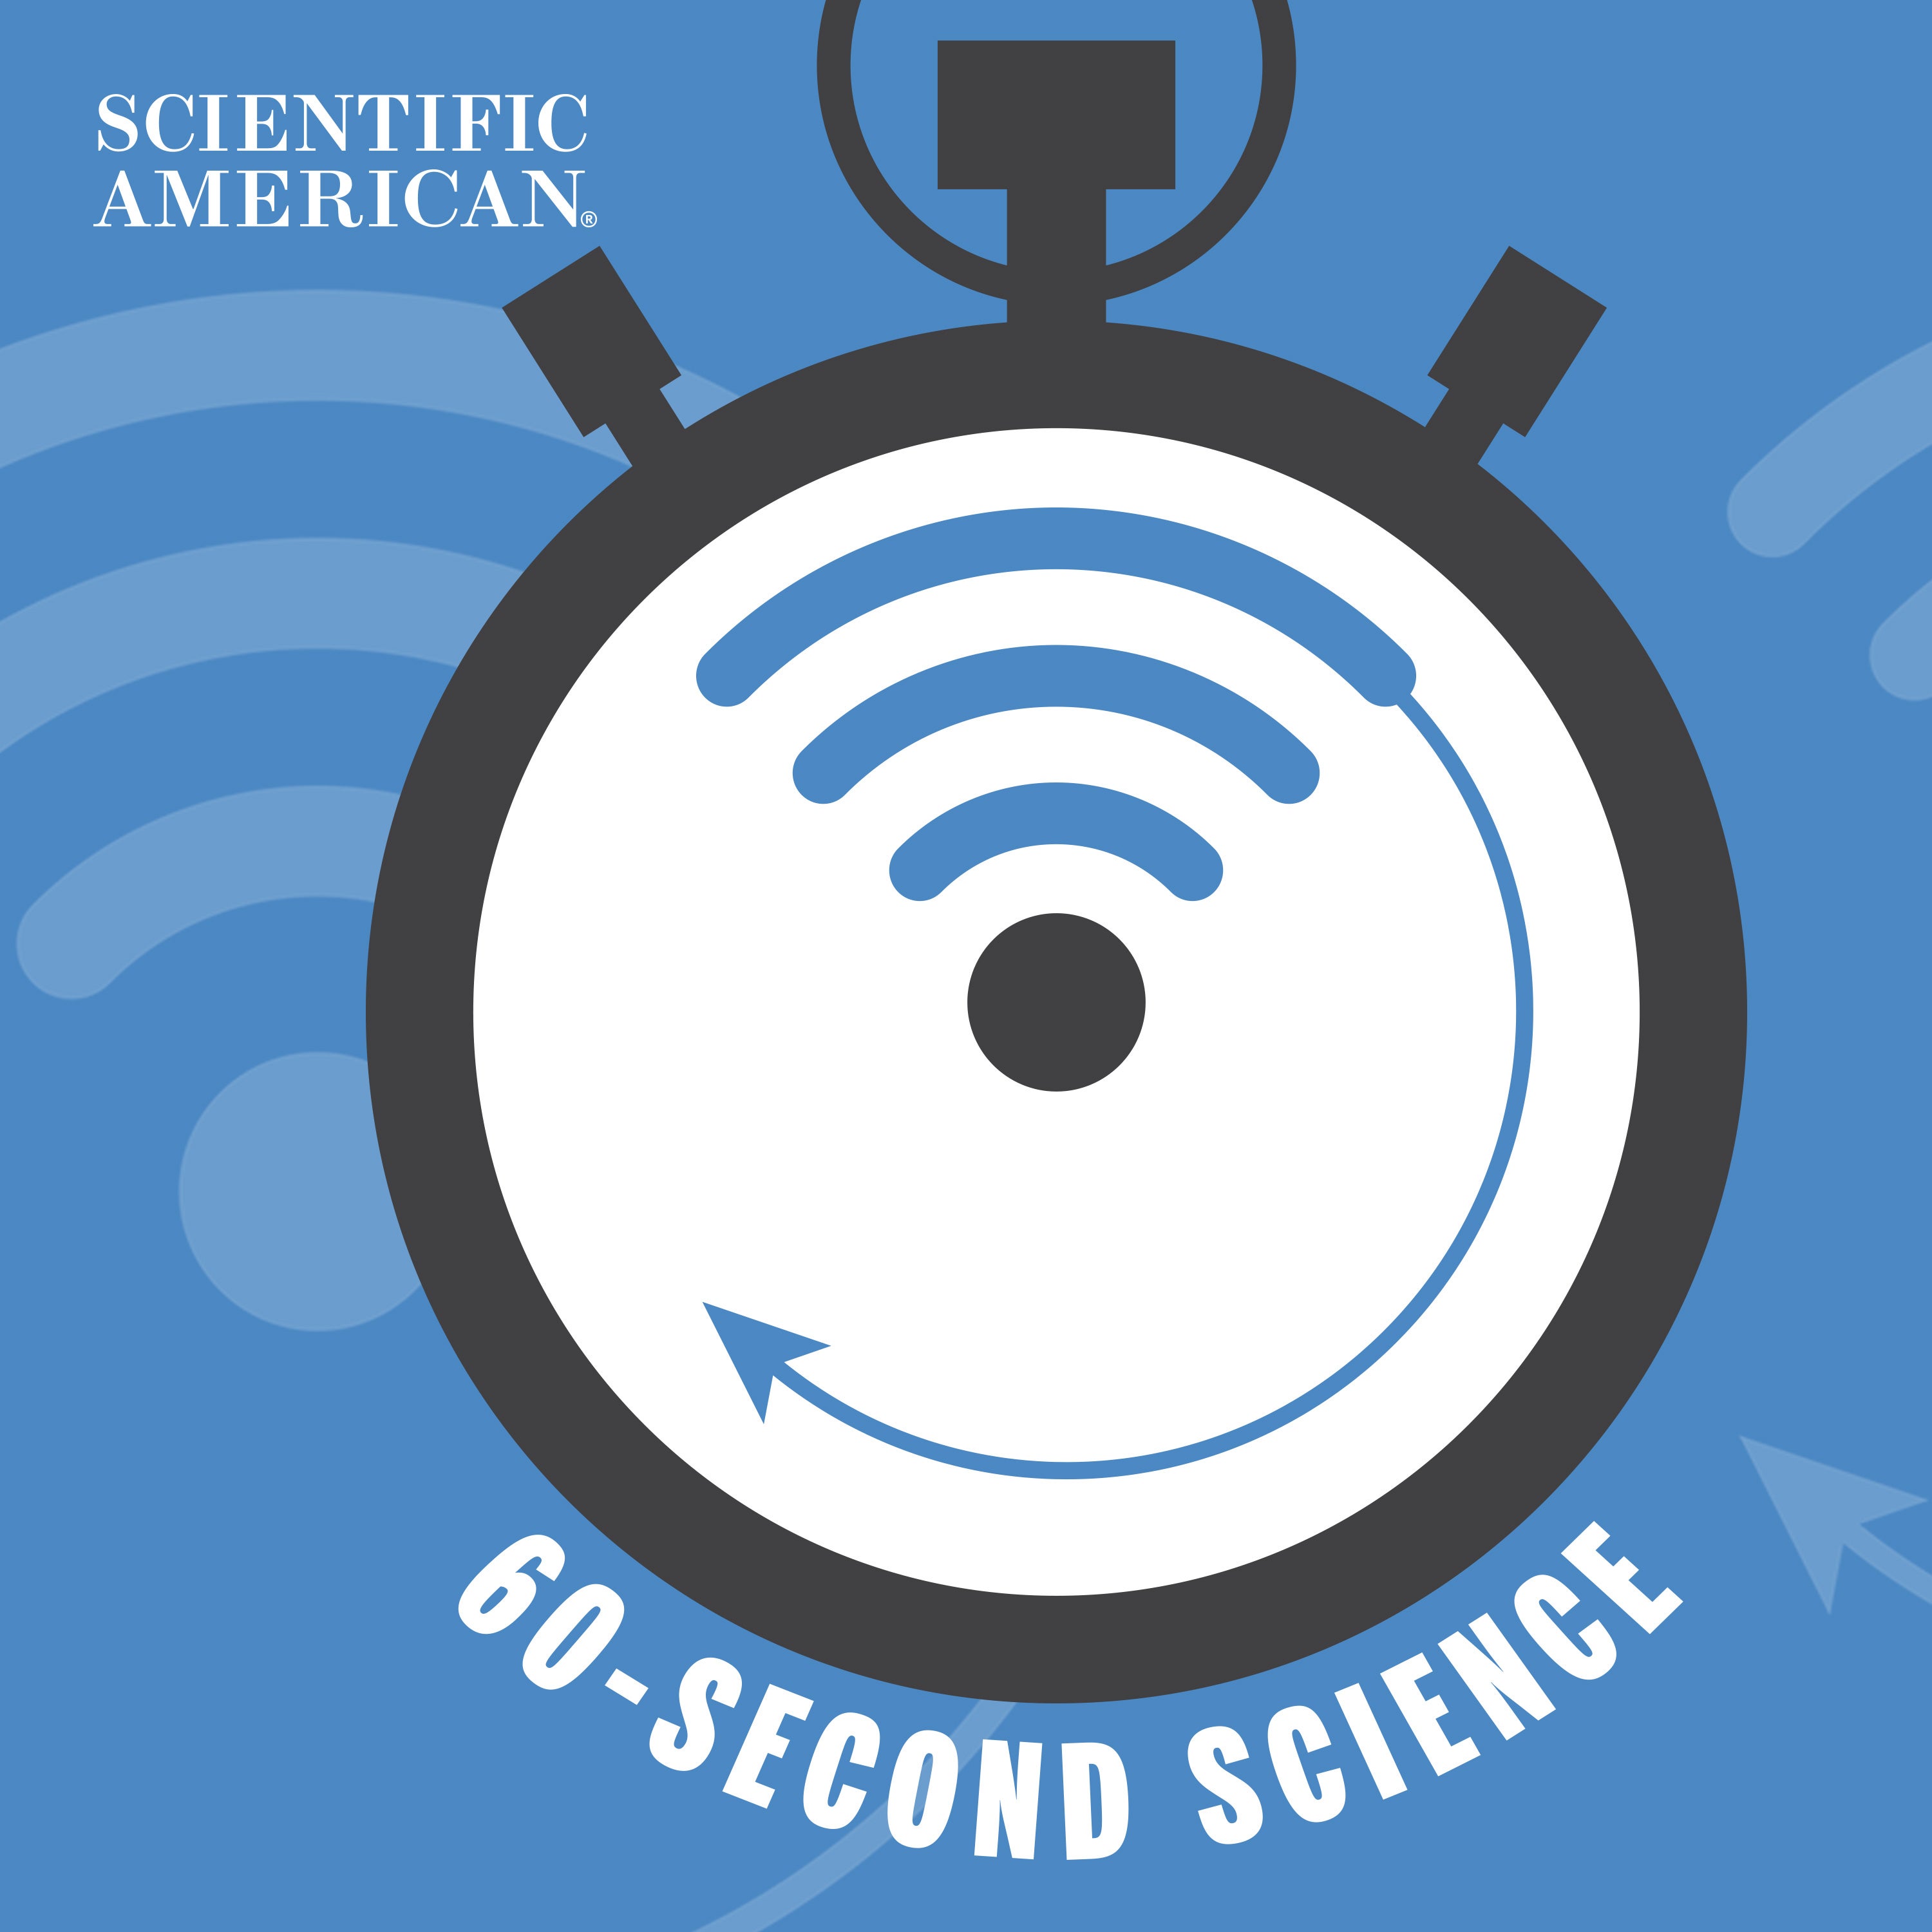 6) 60 Second Science